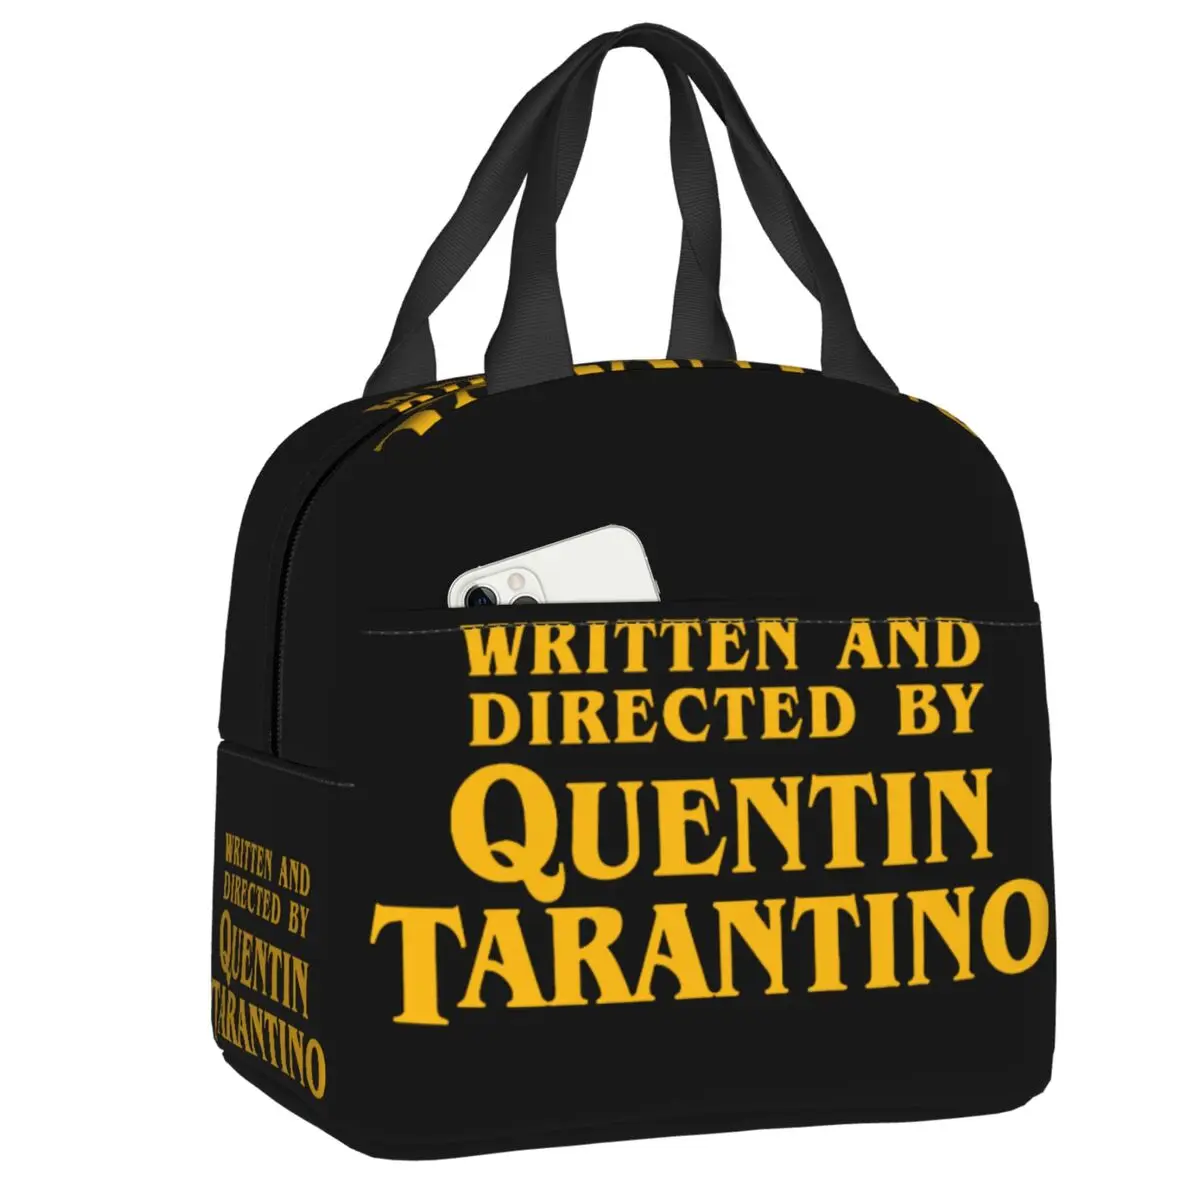 

Quentin Tarantino Insulated Lunch Bag for Women Kids Pulp Fiction Kill Bill Movie Portable Thermal Cooler Lunch Box Food Tote